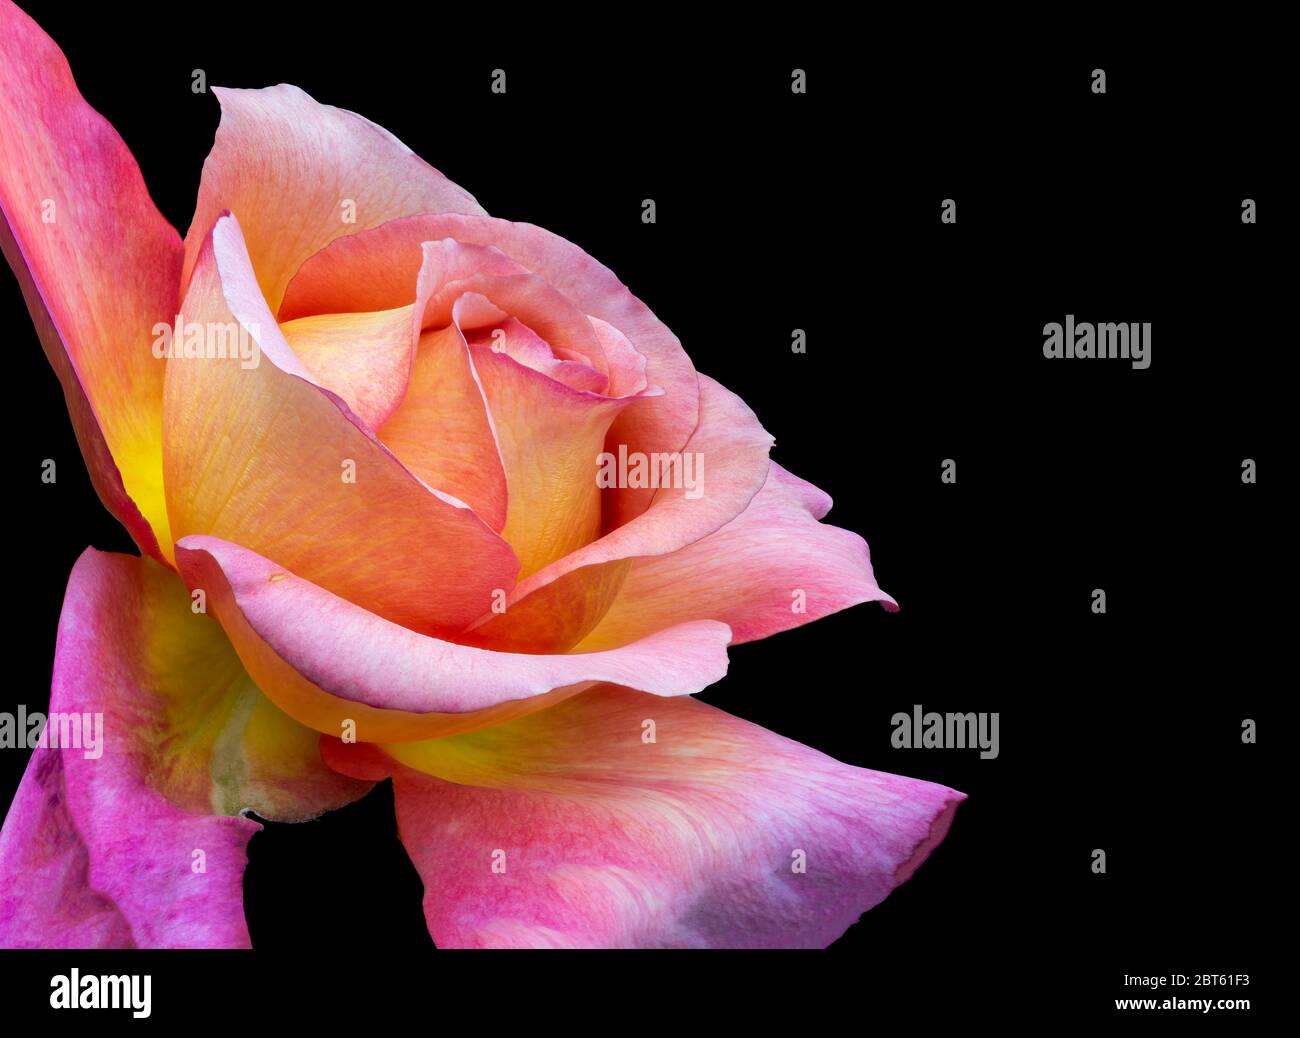 veined bright colorful rose macro of a single isolated yellow pink orange violet blossom on black background Stock Photo